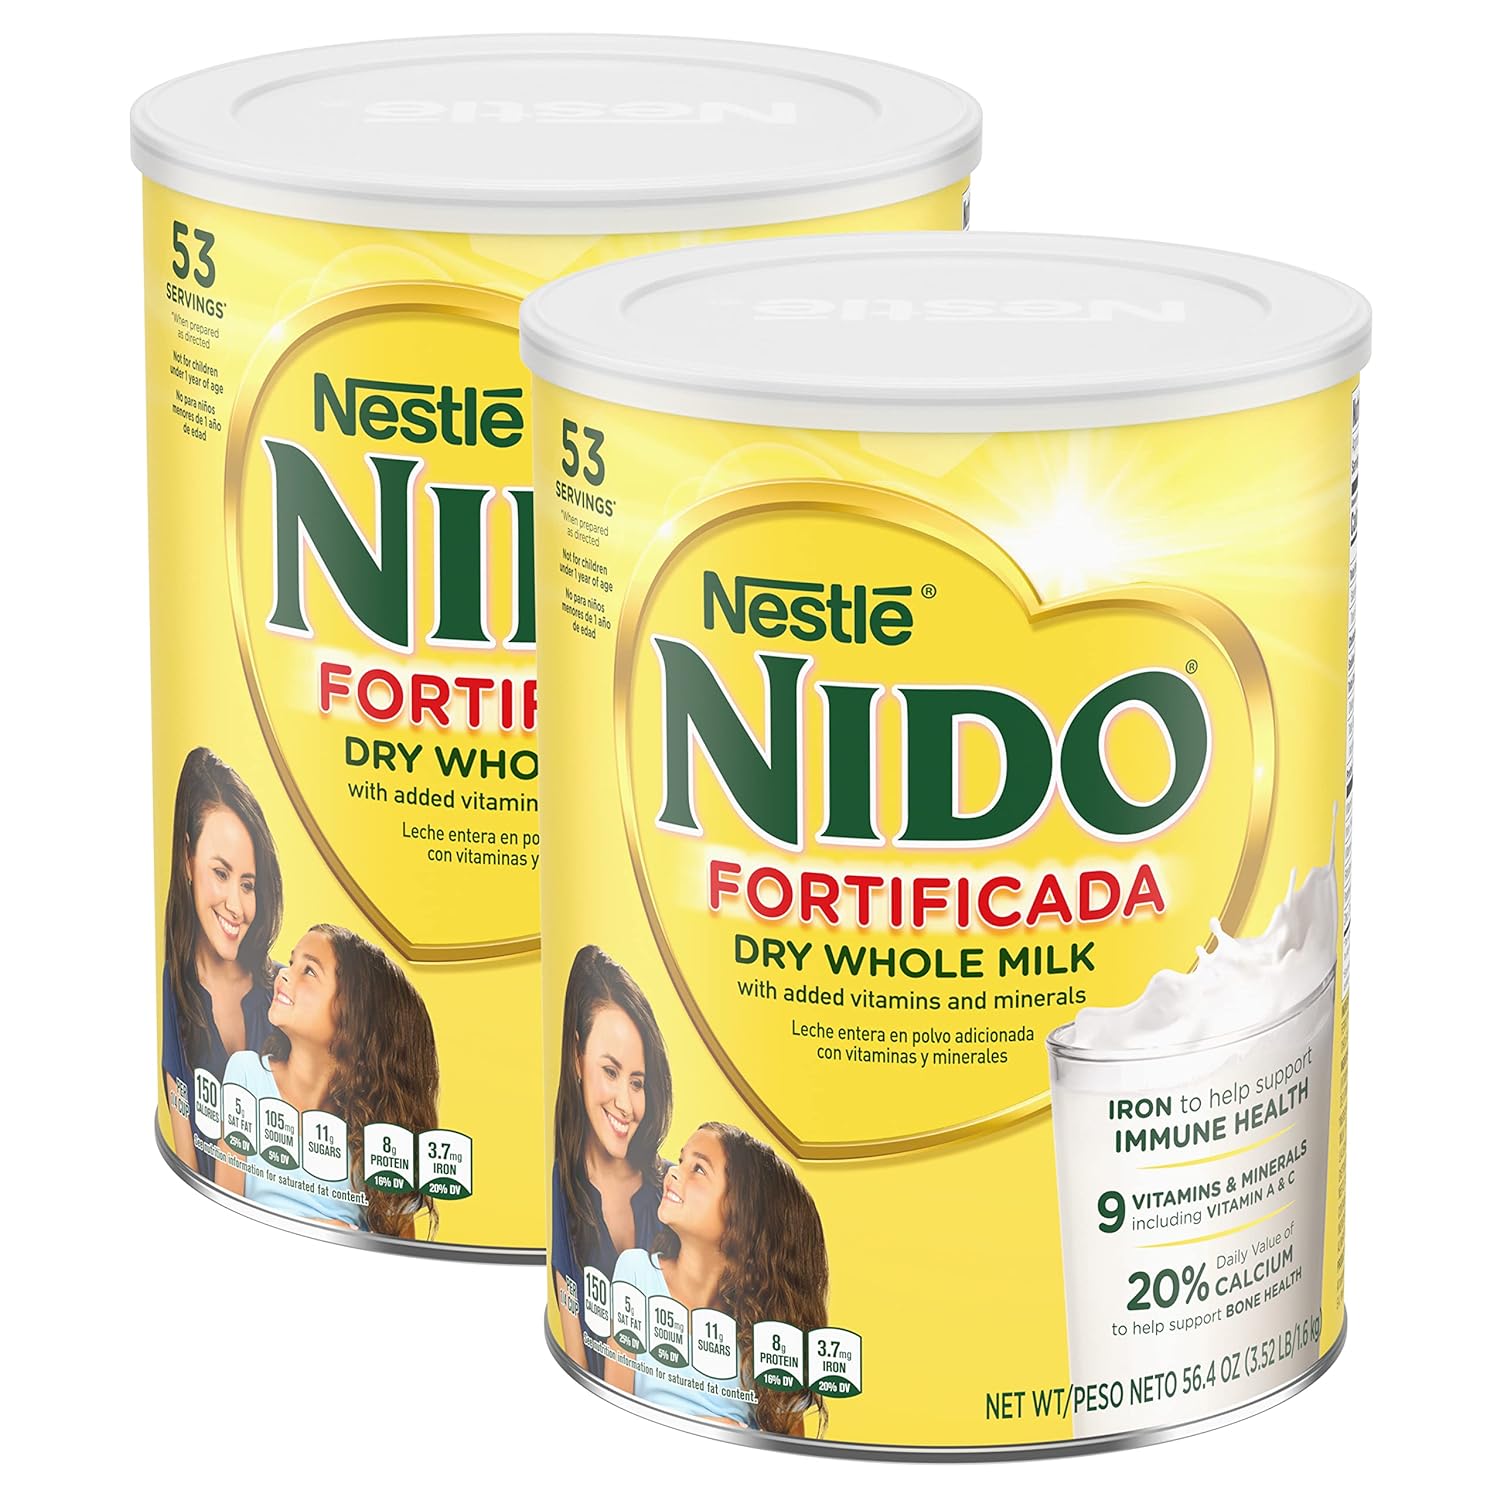 Wholesale prices with free shipping all over United States NIDO Fortificada Powdered Drink Mix - Dry Whole Milk Powder with Vitamins and Minerals - 56.4 Oz (3.52 LB) Canister - Steven Deals